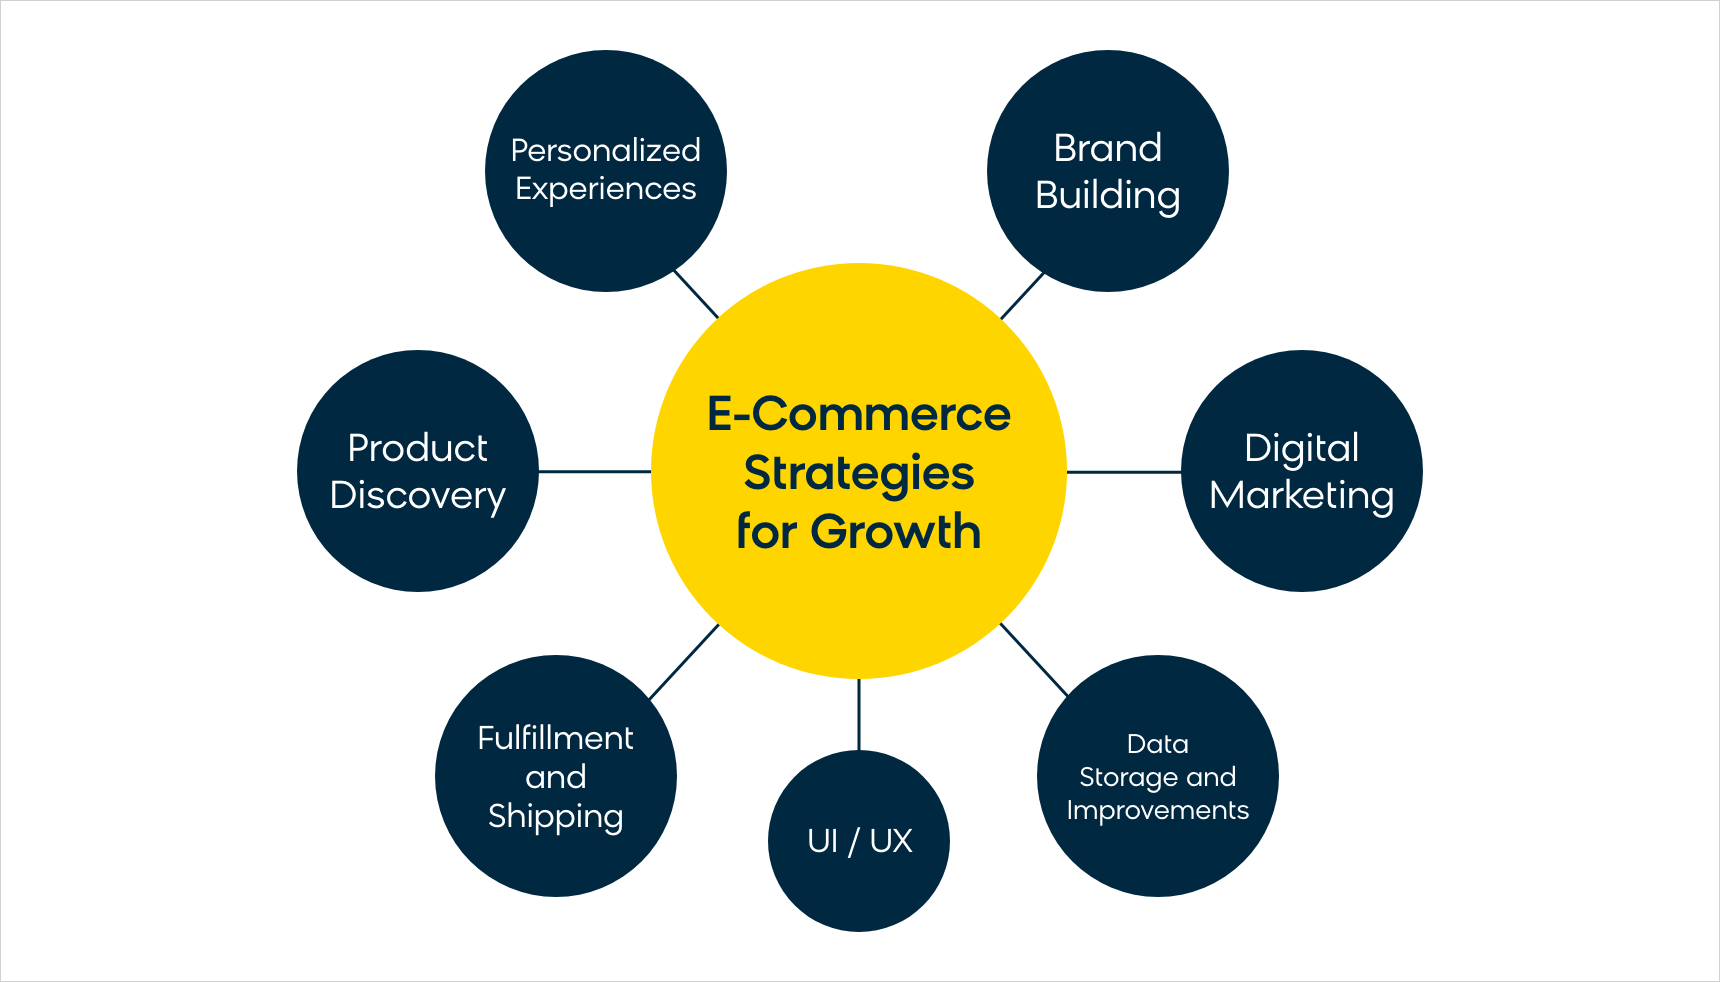 E-Commerce Priorities and Strategies for Growth